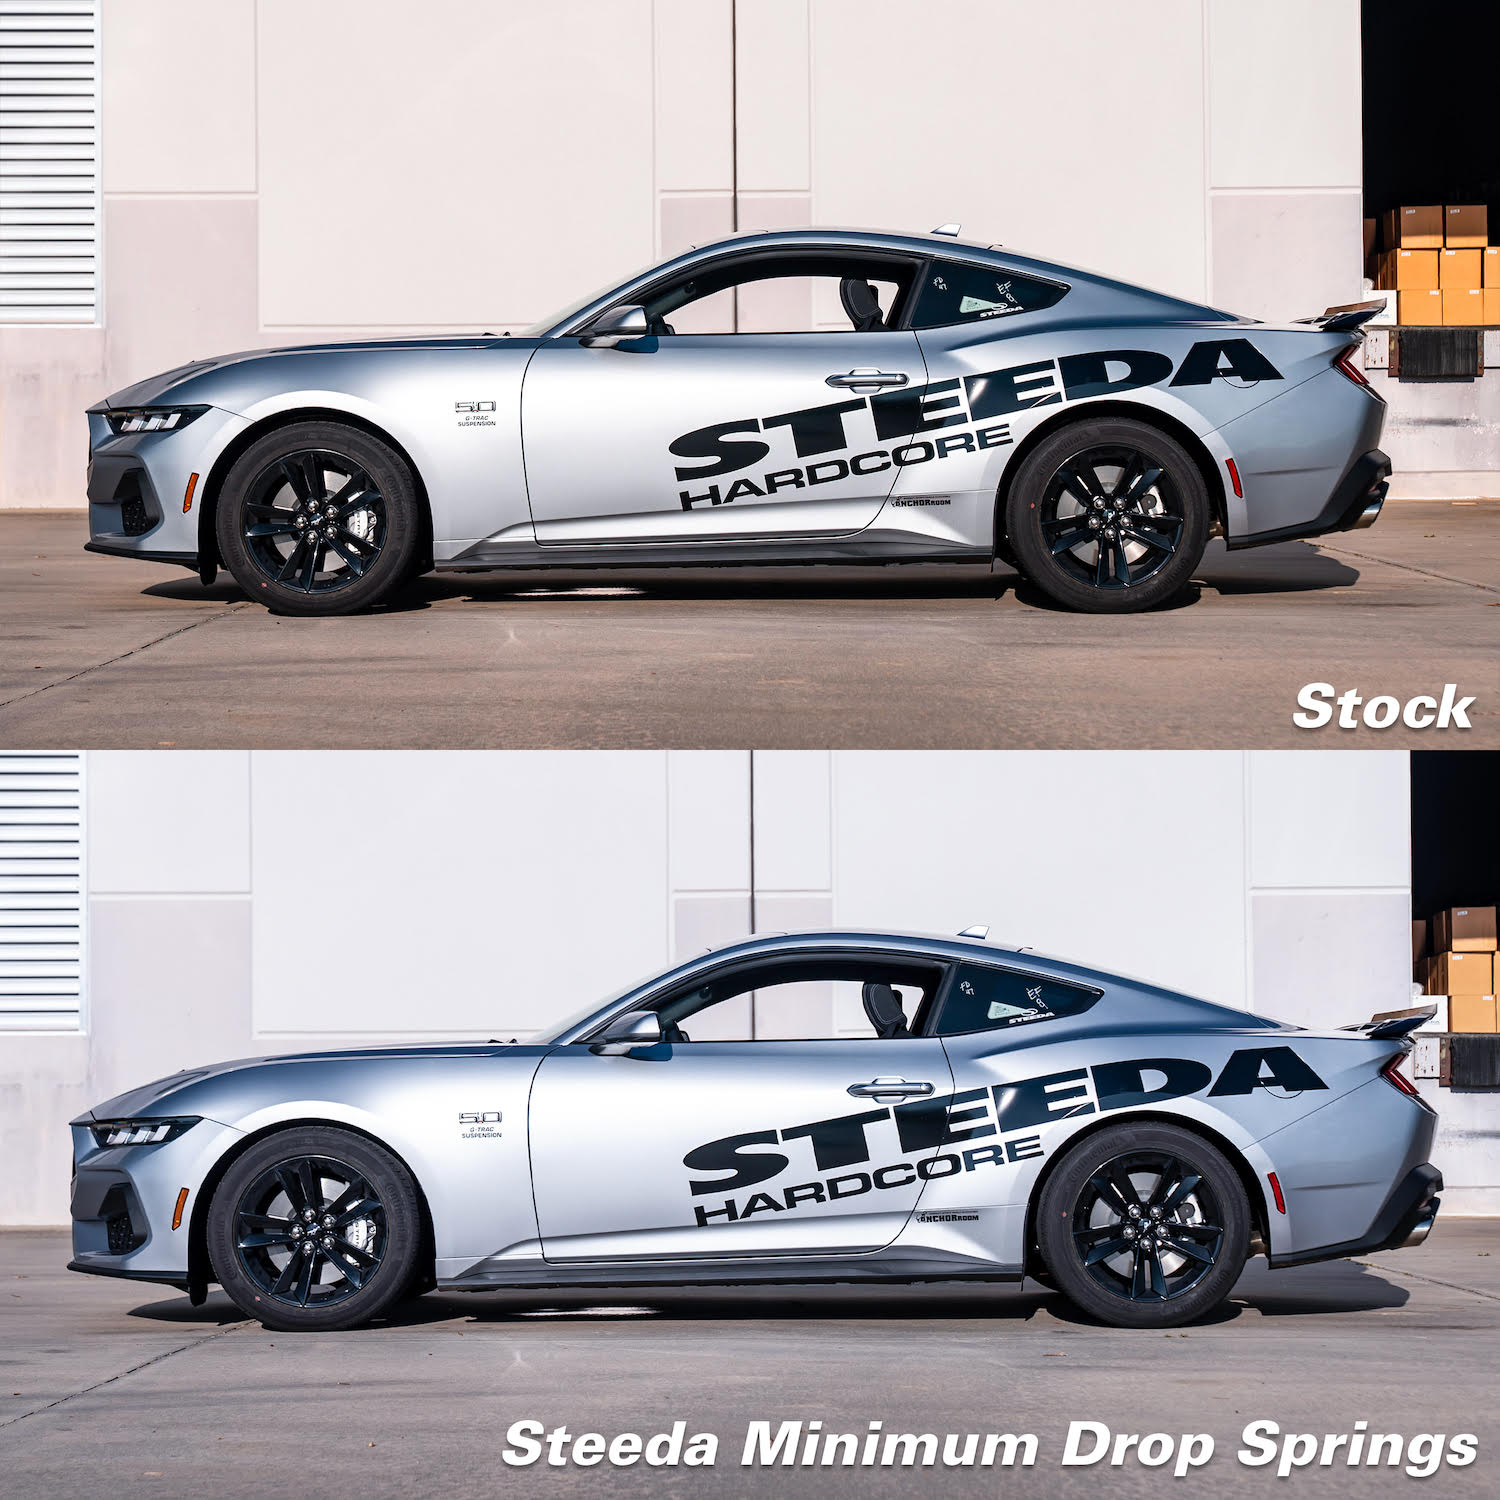 S650 Mustang Now Available - Steeda Lowering Springs for the S650 1694562721742